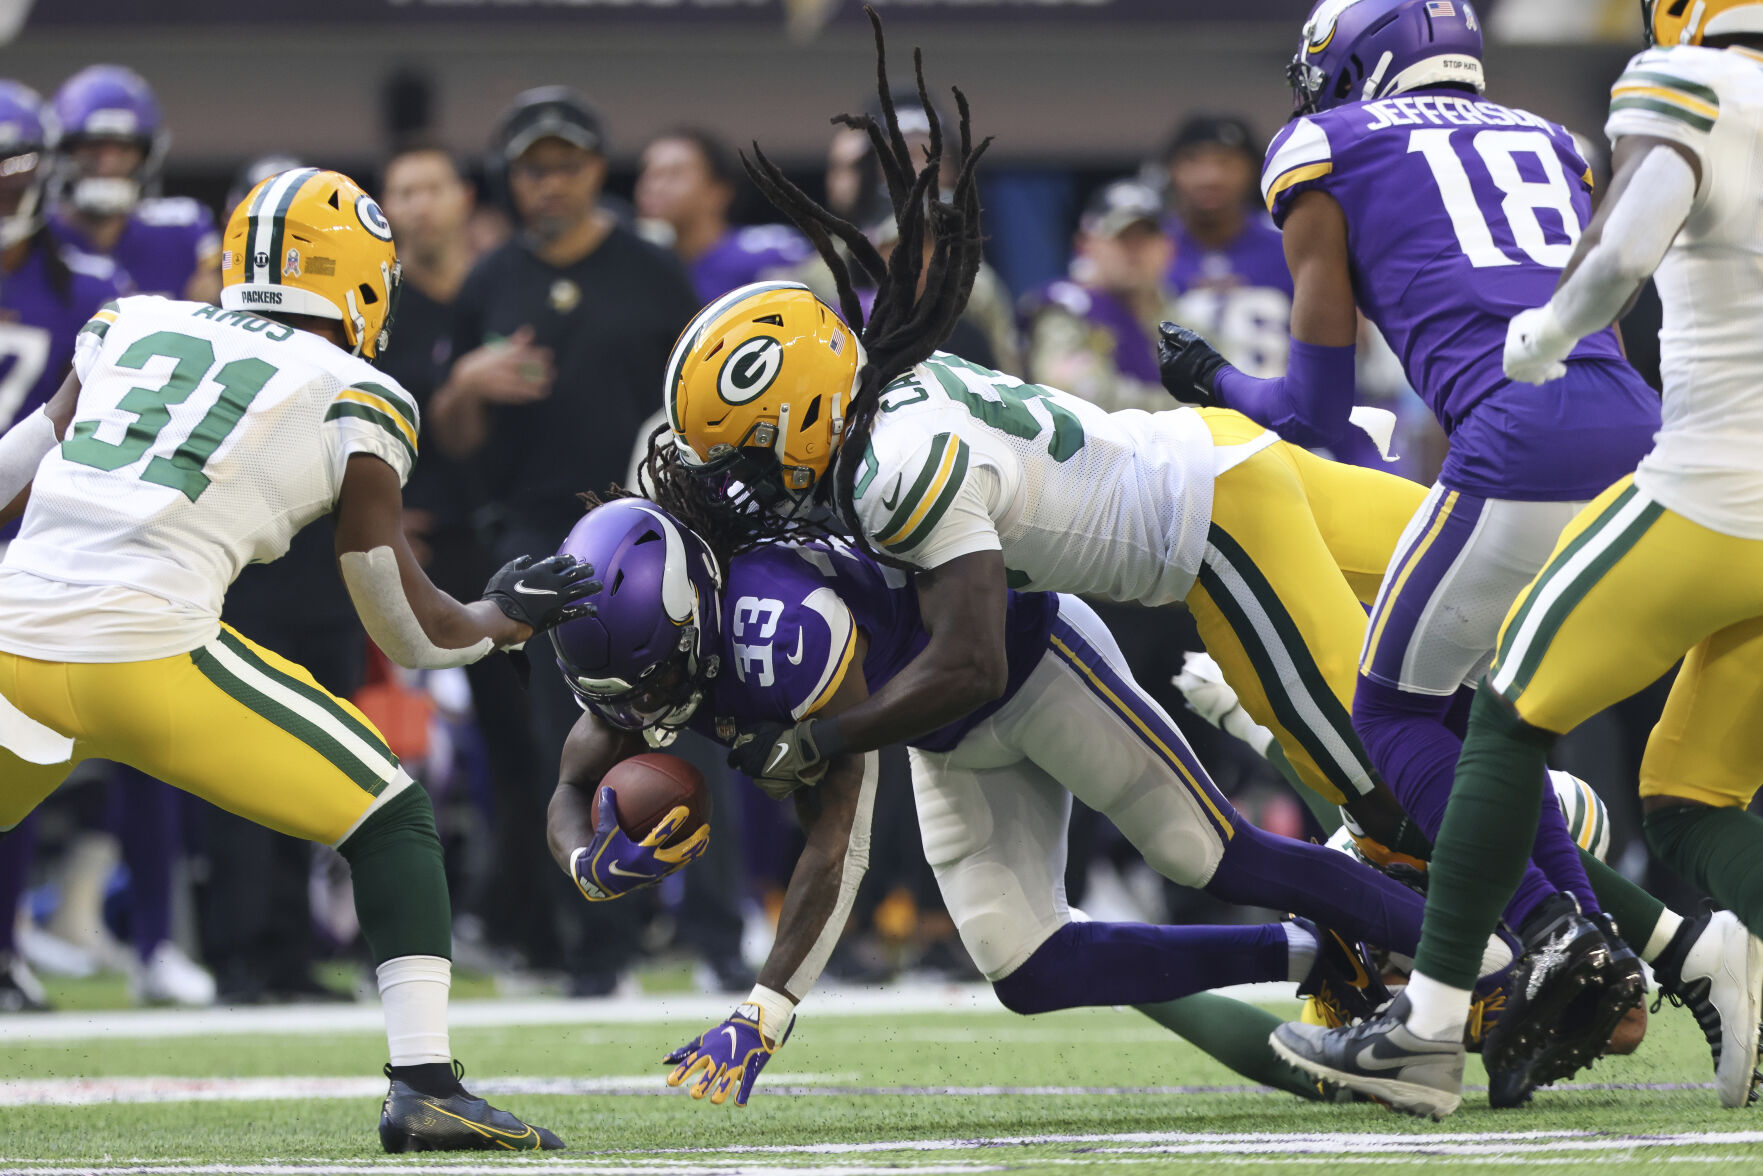 A new era? With De'Vondre Campbell and Quay Walker, Packers now